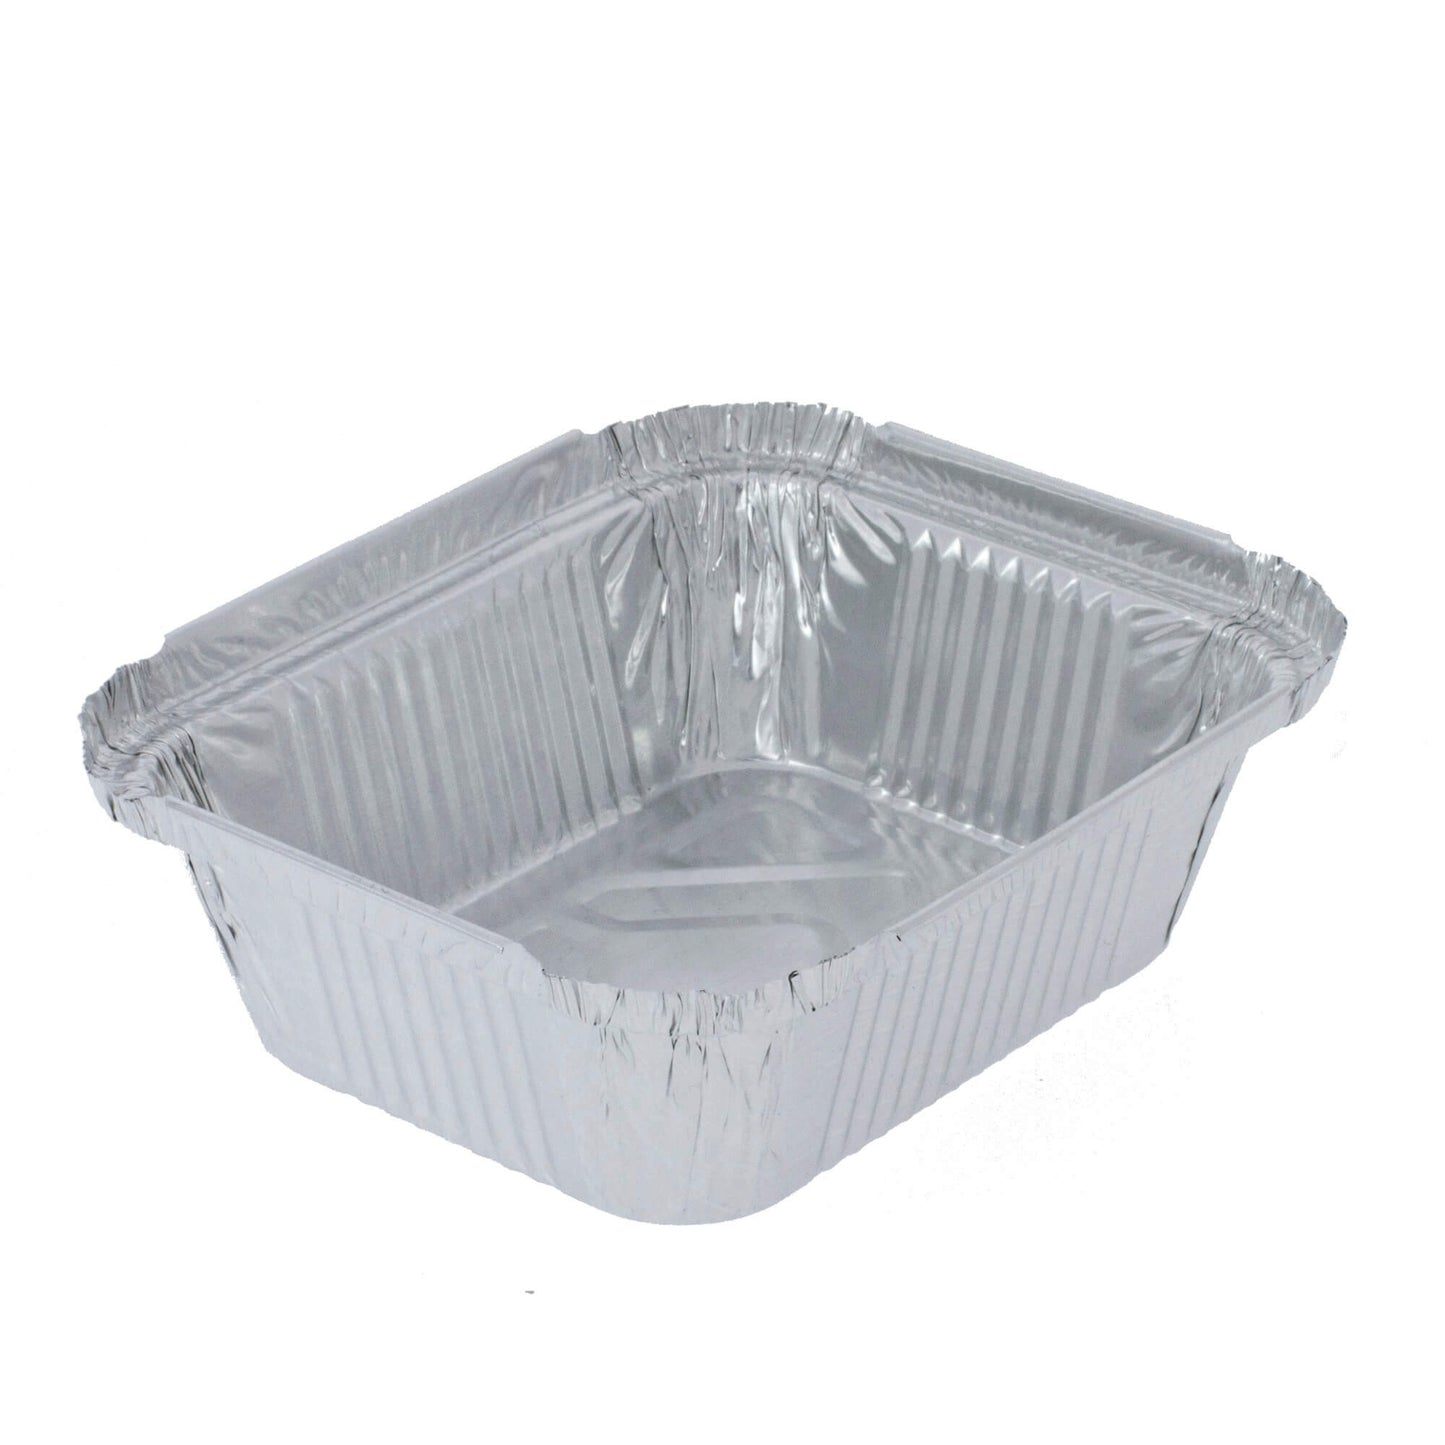 No. 1 Aluminium Foil Food Containers Recyclable 1000pk (Small)